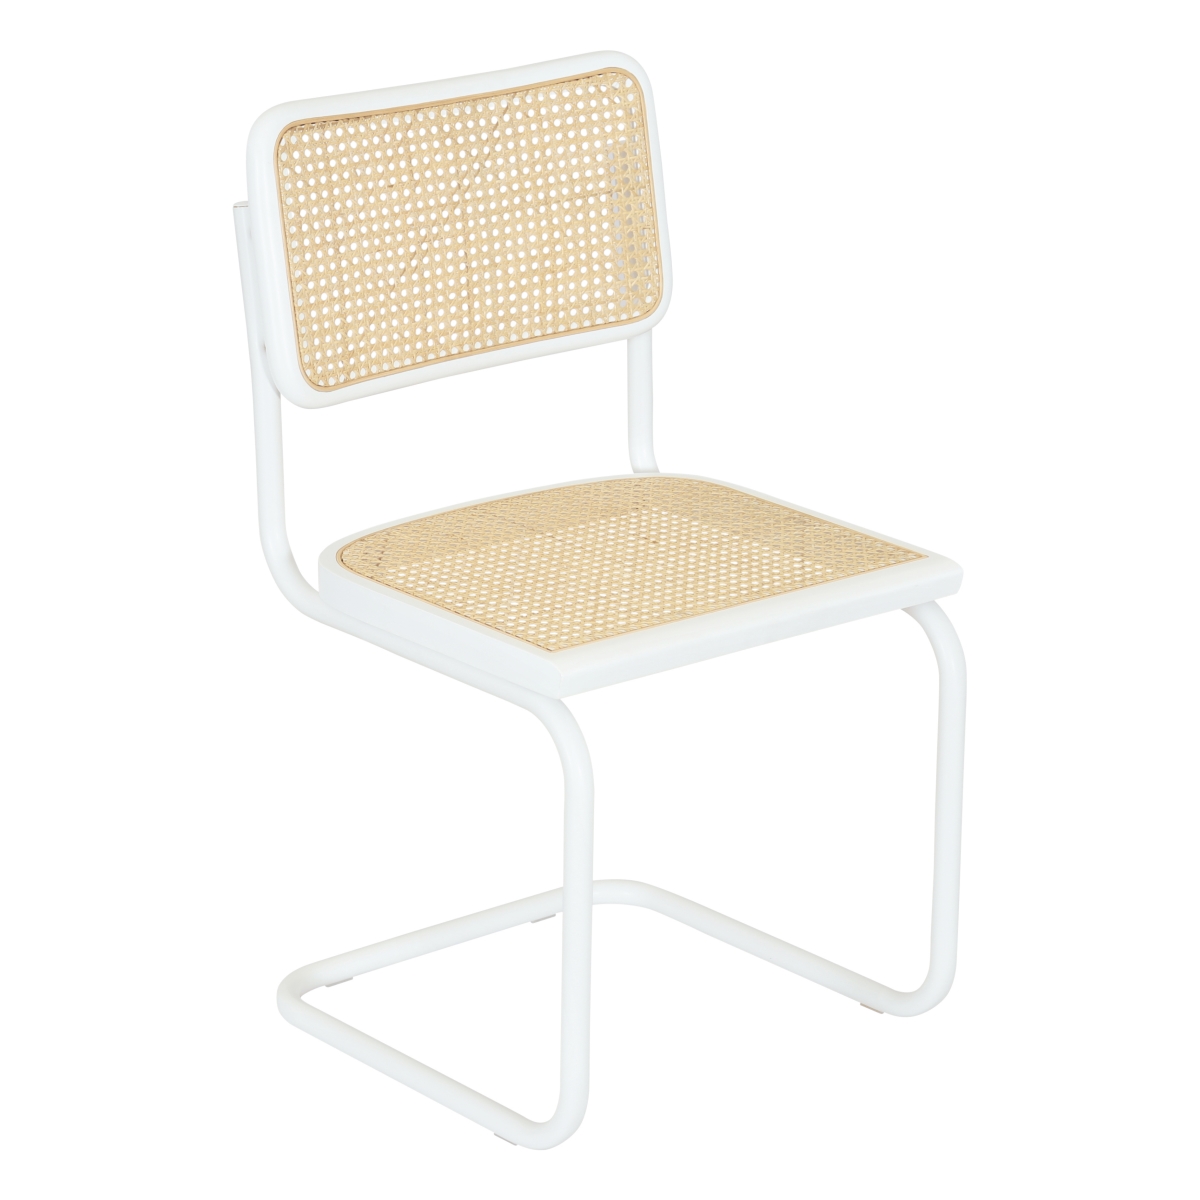 Picture of Breuer Chair Company UNB-BCC-CSCA-SC-WHTF-WHTW-NTRLC Marcel Breuer B32 Cesca Cane Cantilever Side Chair w/ White Steel Frame White Wood &amp; Natural Cane (Made in Italy) by Furnish Theory